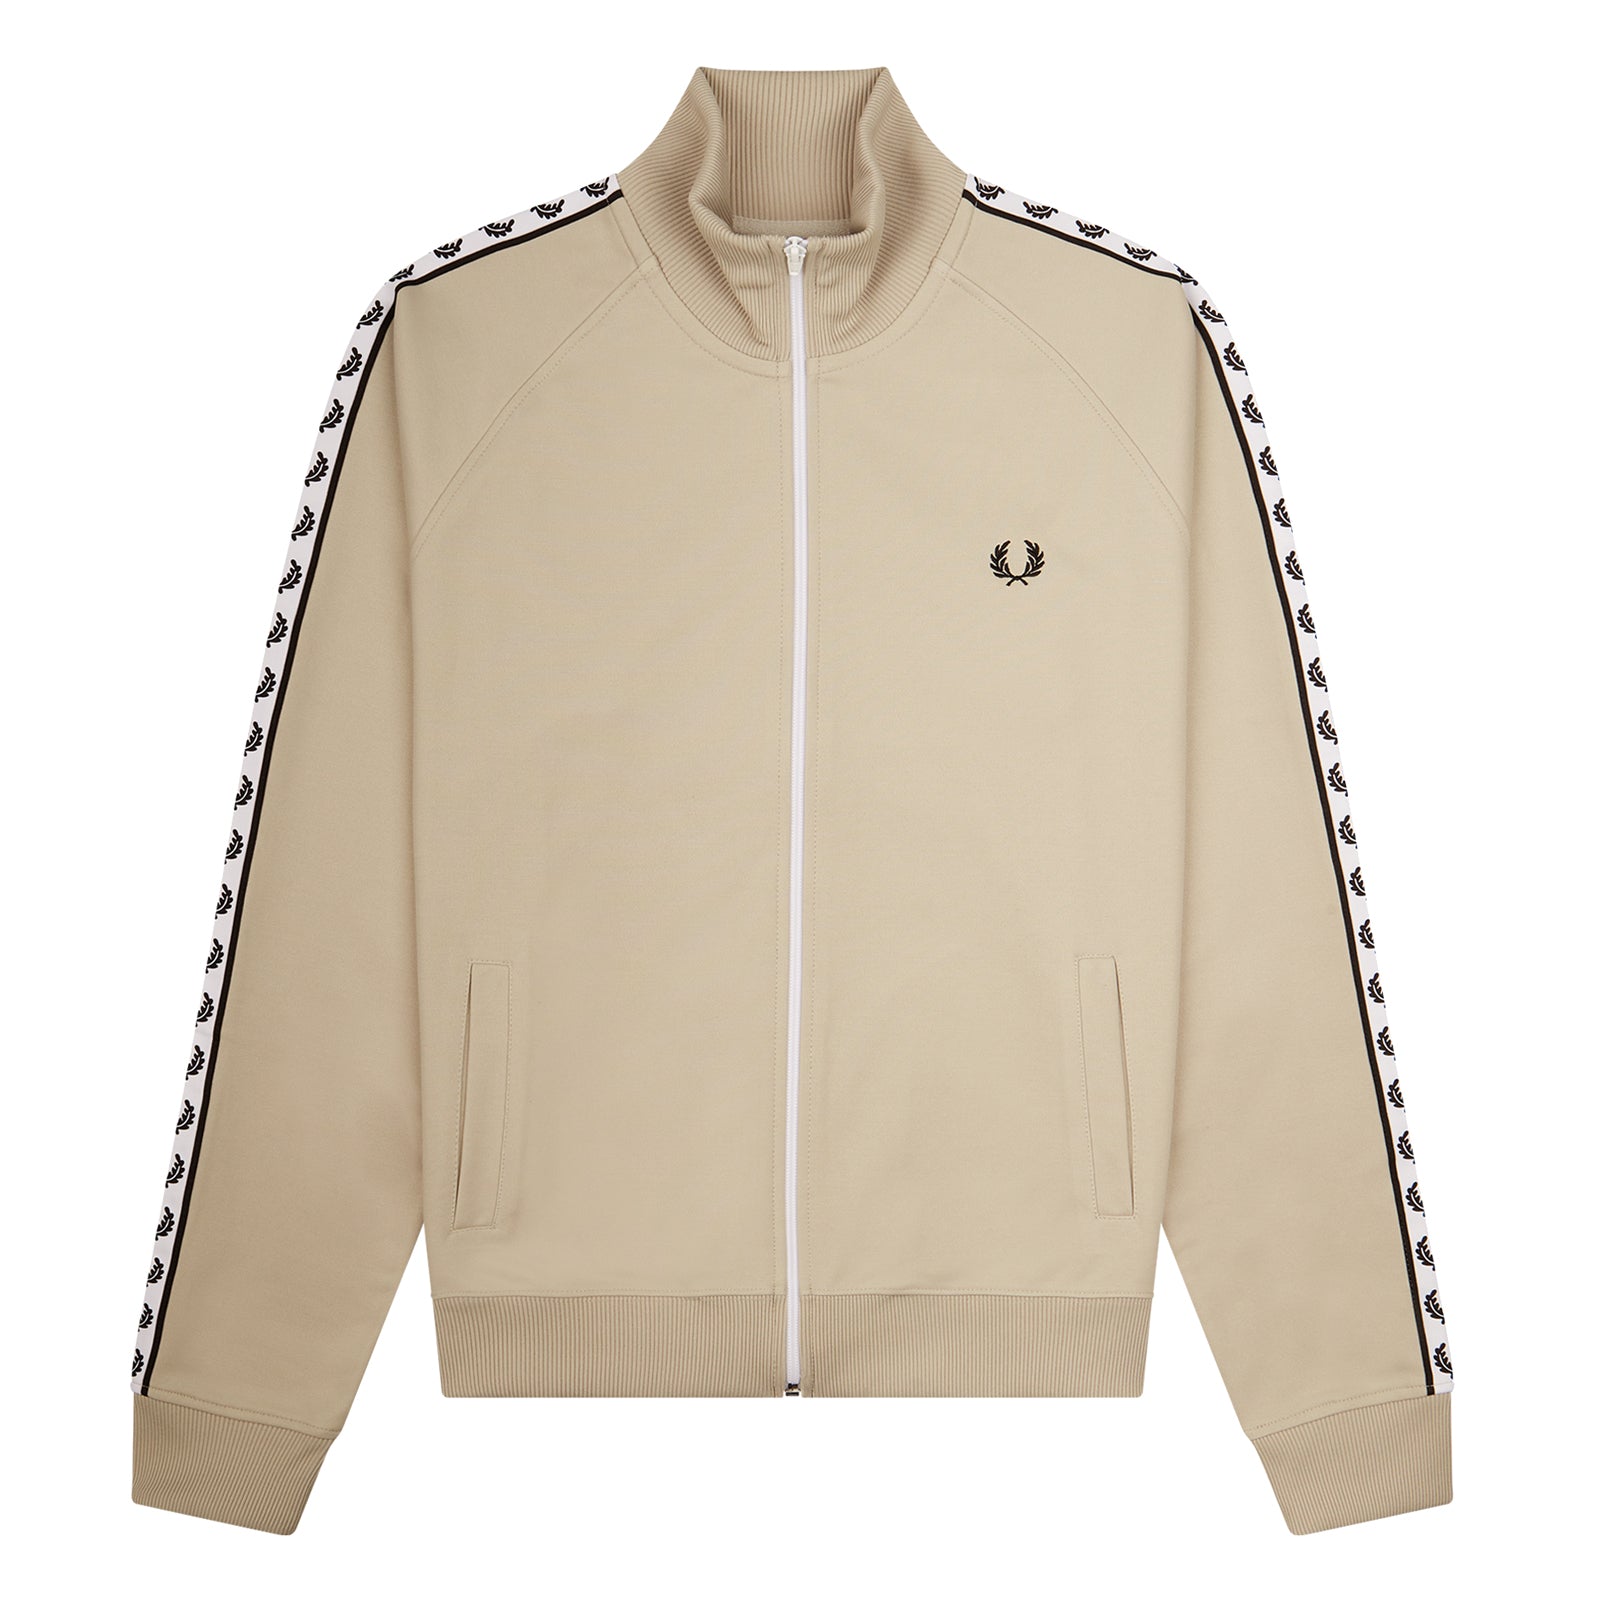 Fred Perry Taped Track Jacket Light Oyster. Foto de frente.